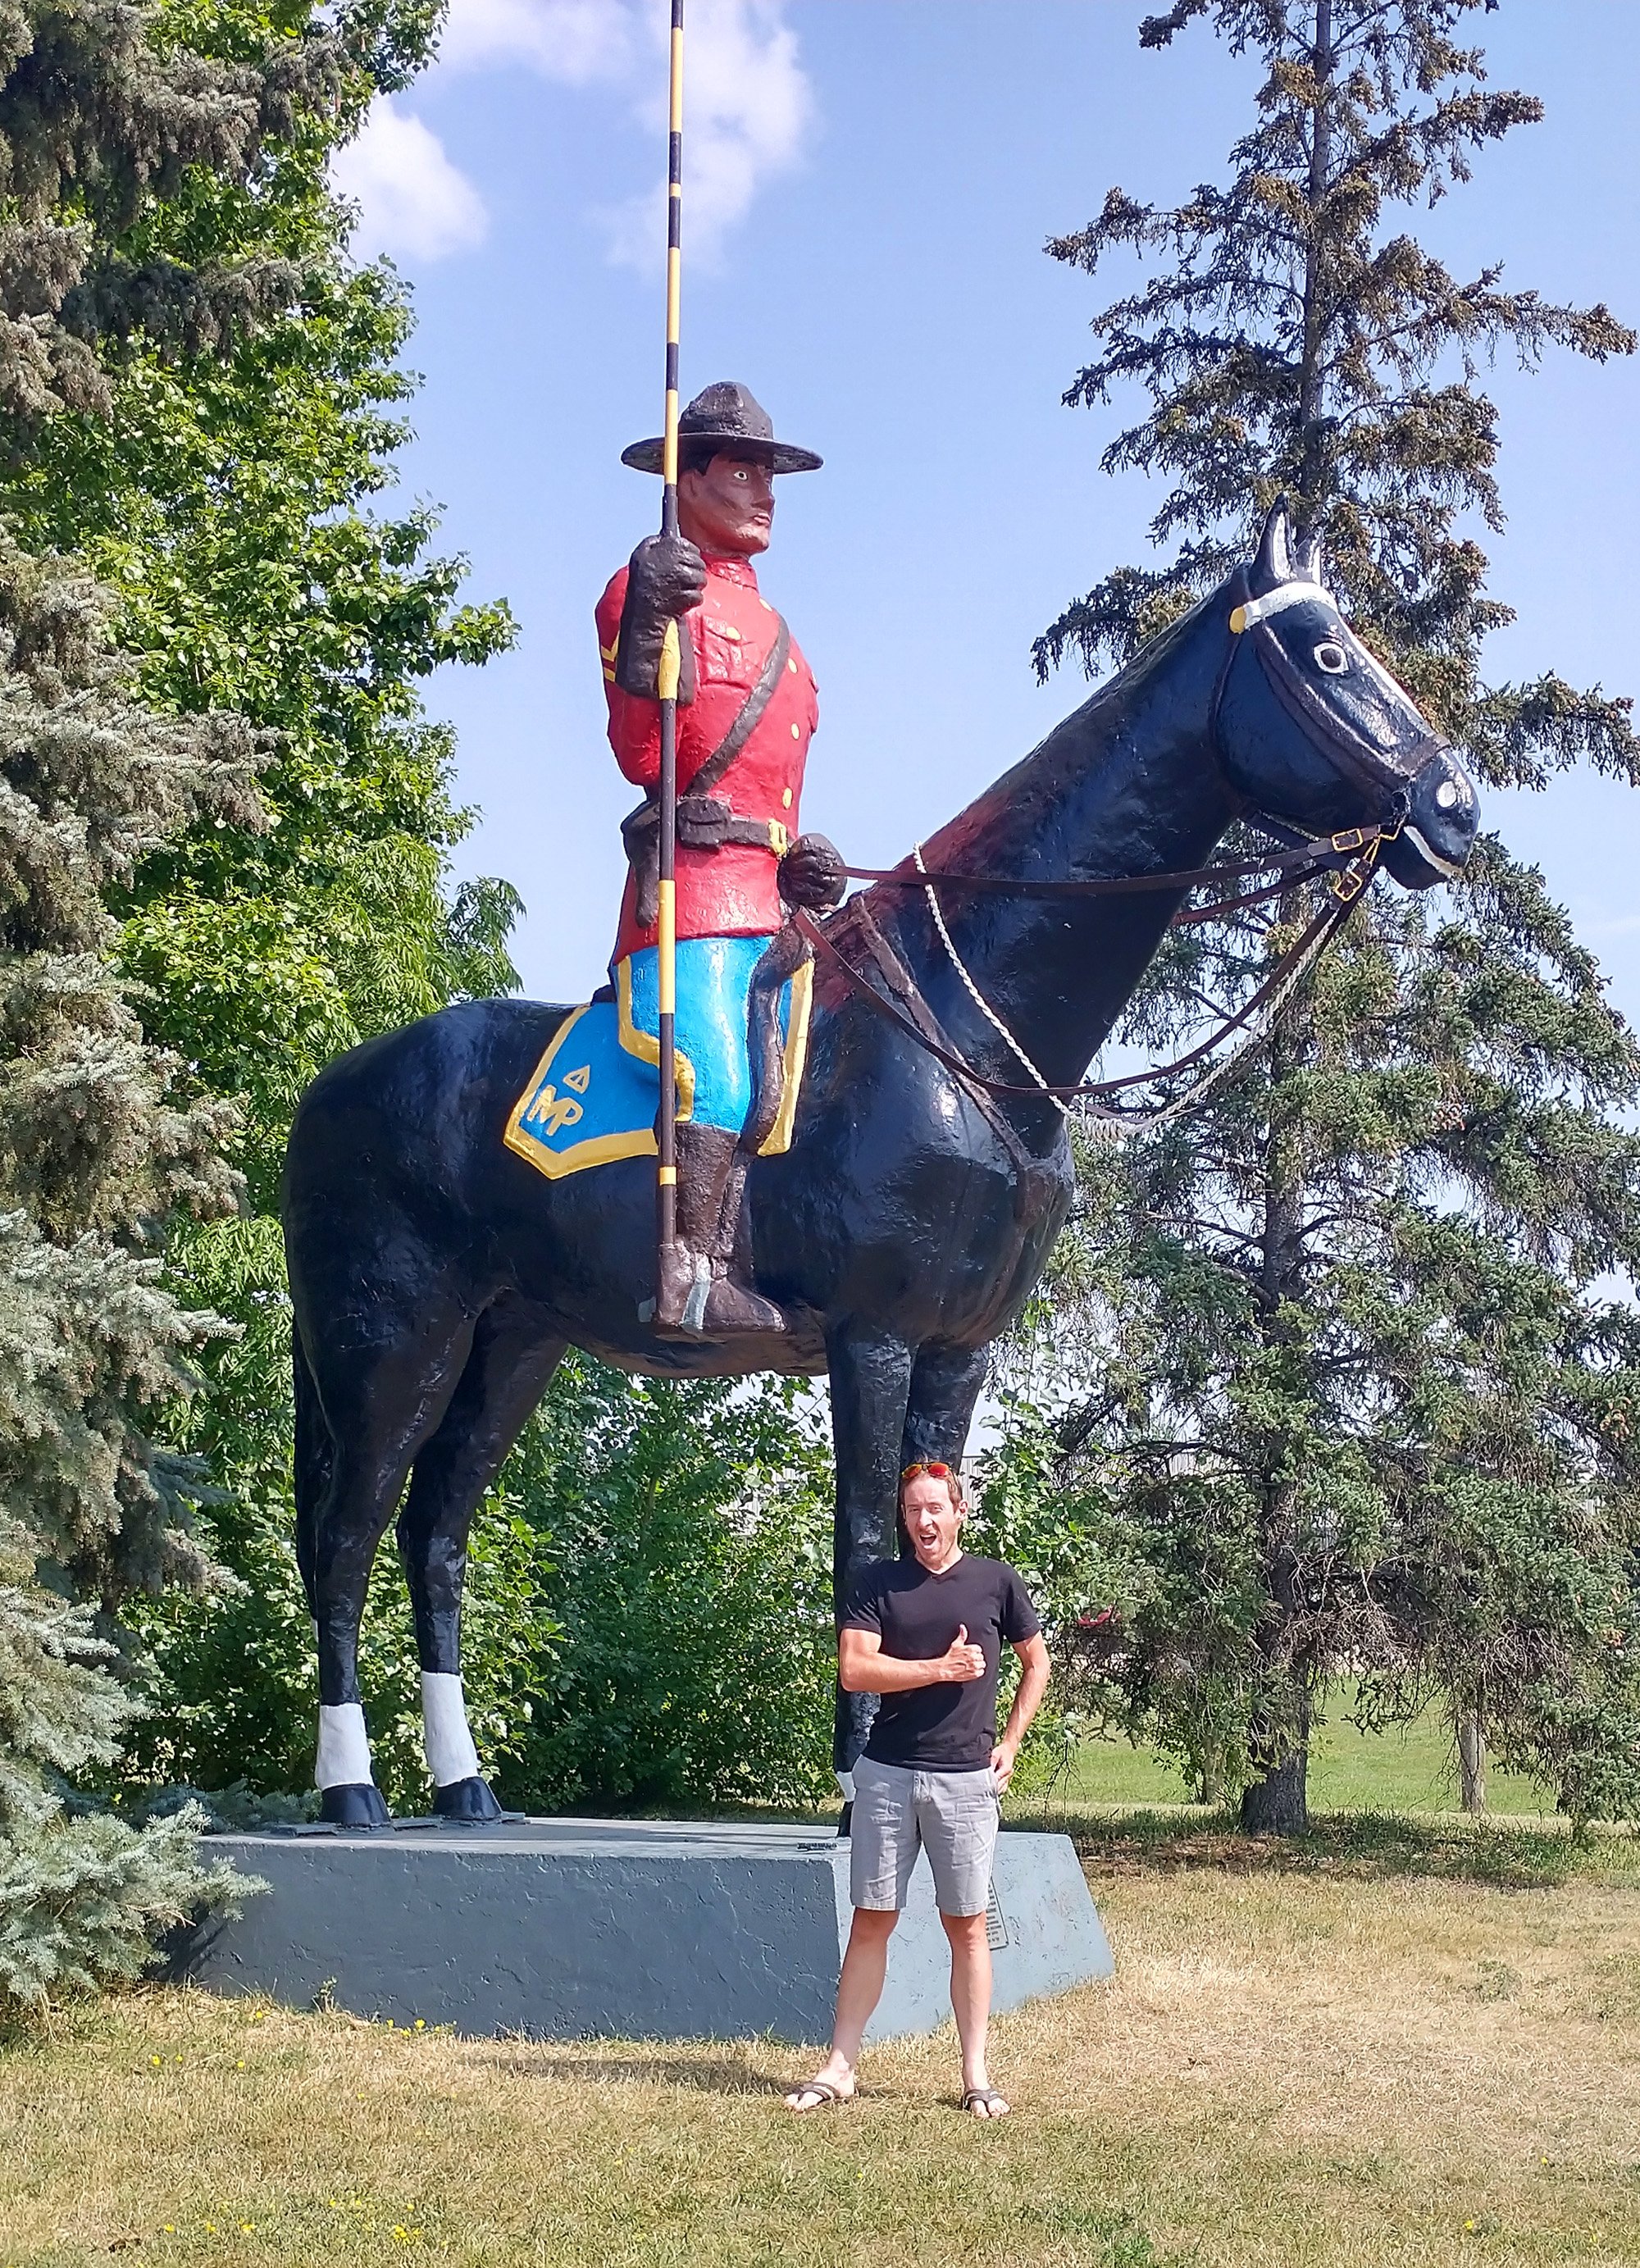 Home of the largest Mountie! That one is safe.